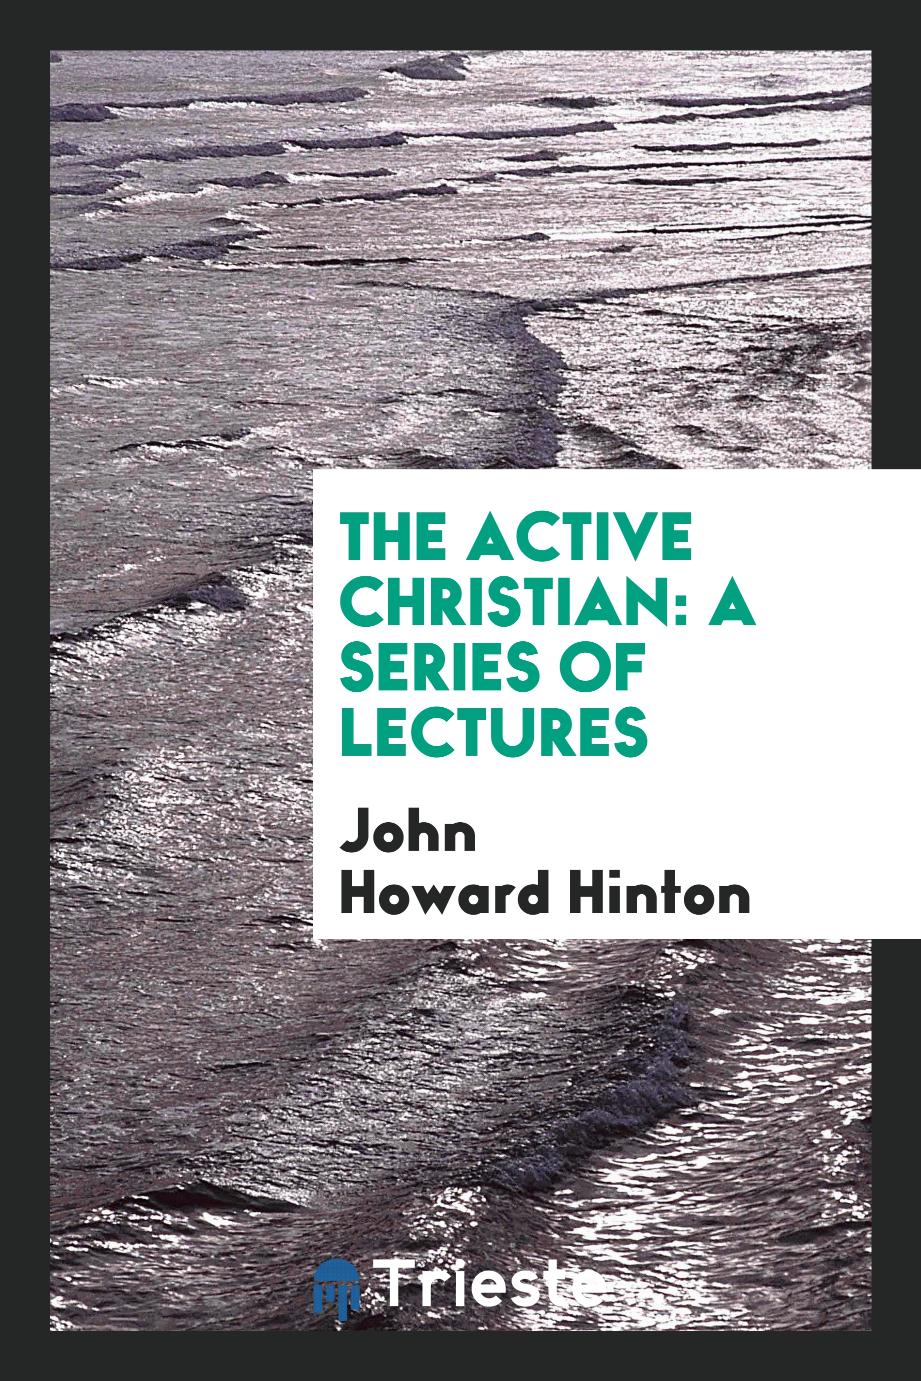 The Active Christian: A Series of Lectures